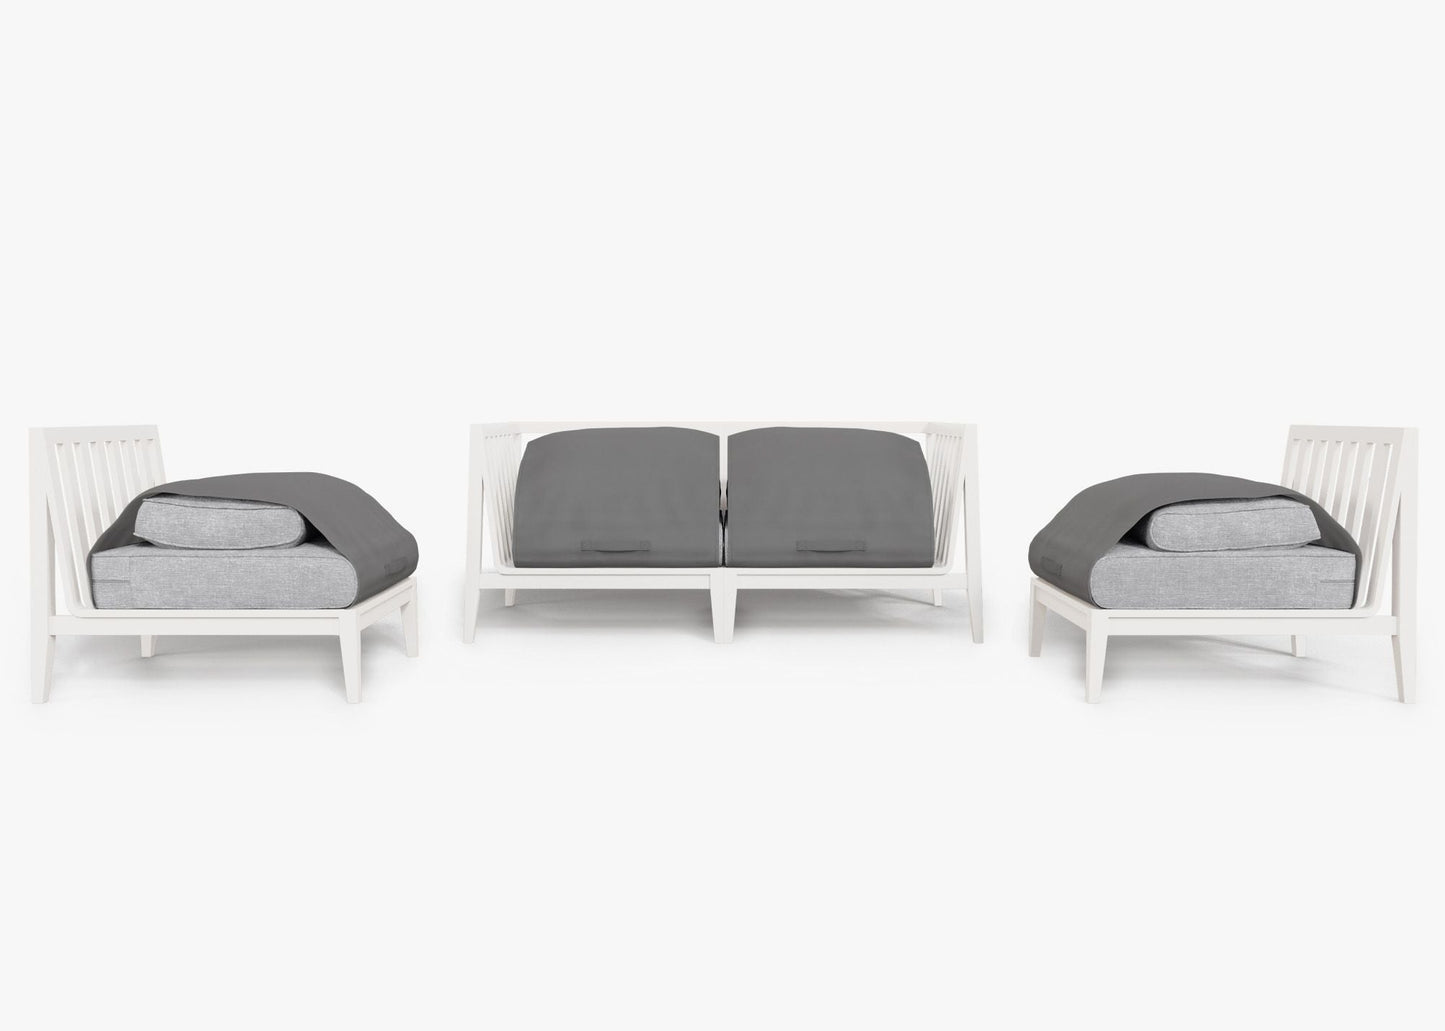 Live Outer 69" White Aluminum Outdoor Loveseat With Armless Chairs & Pacific Fog Gray Cushion (4-Seat)